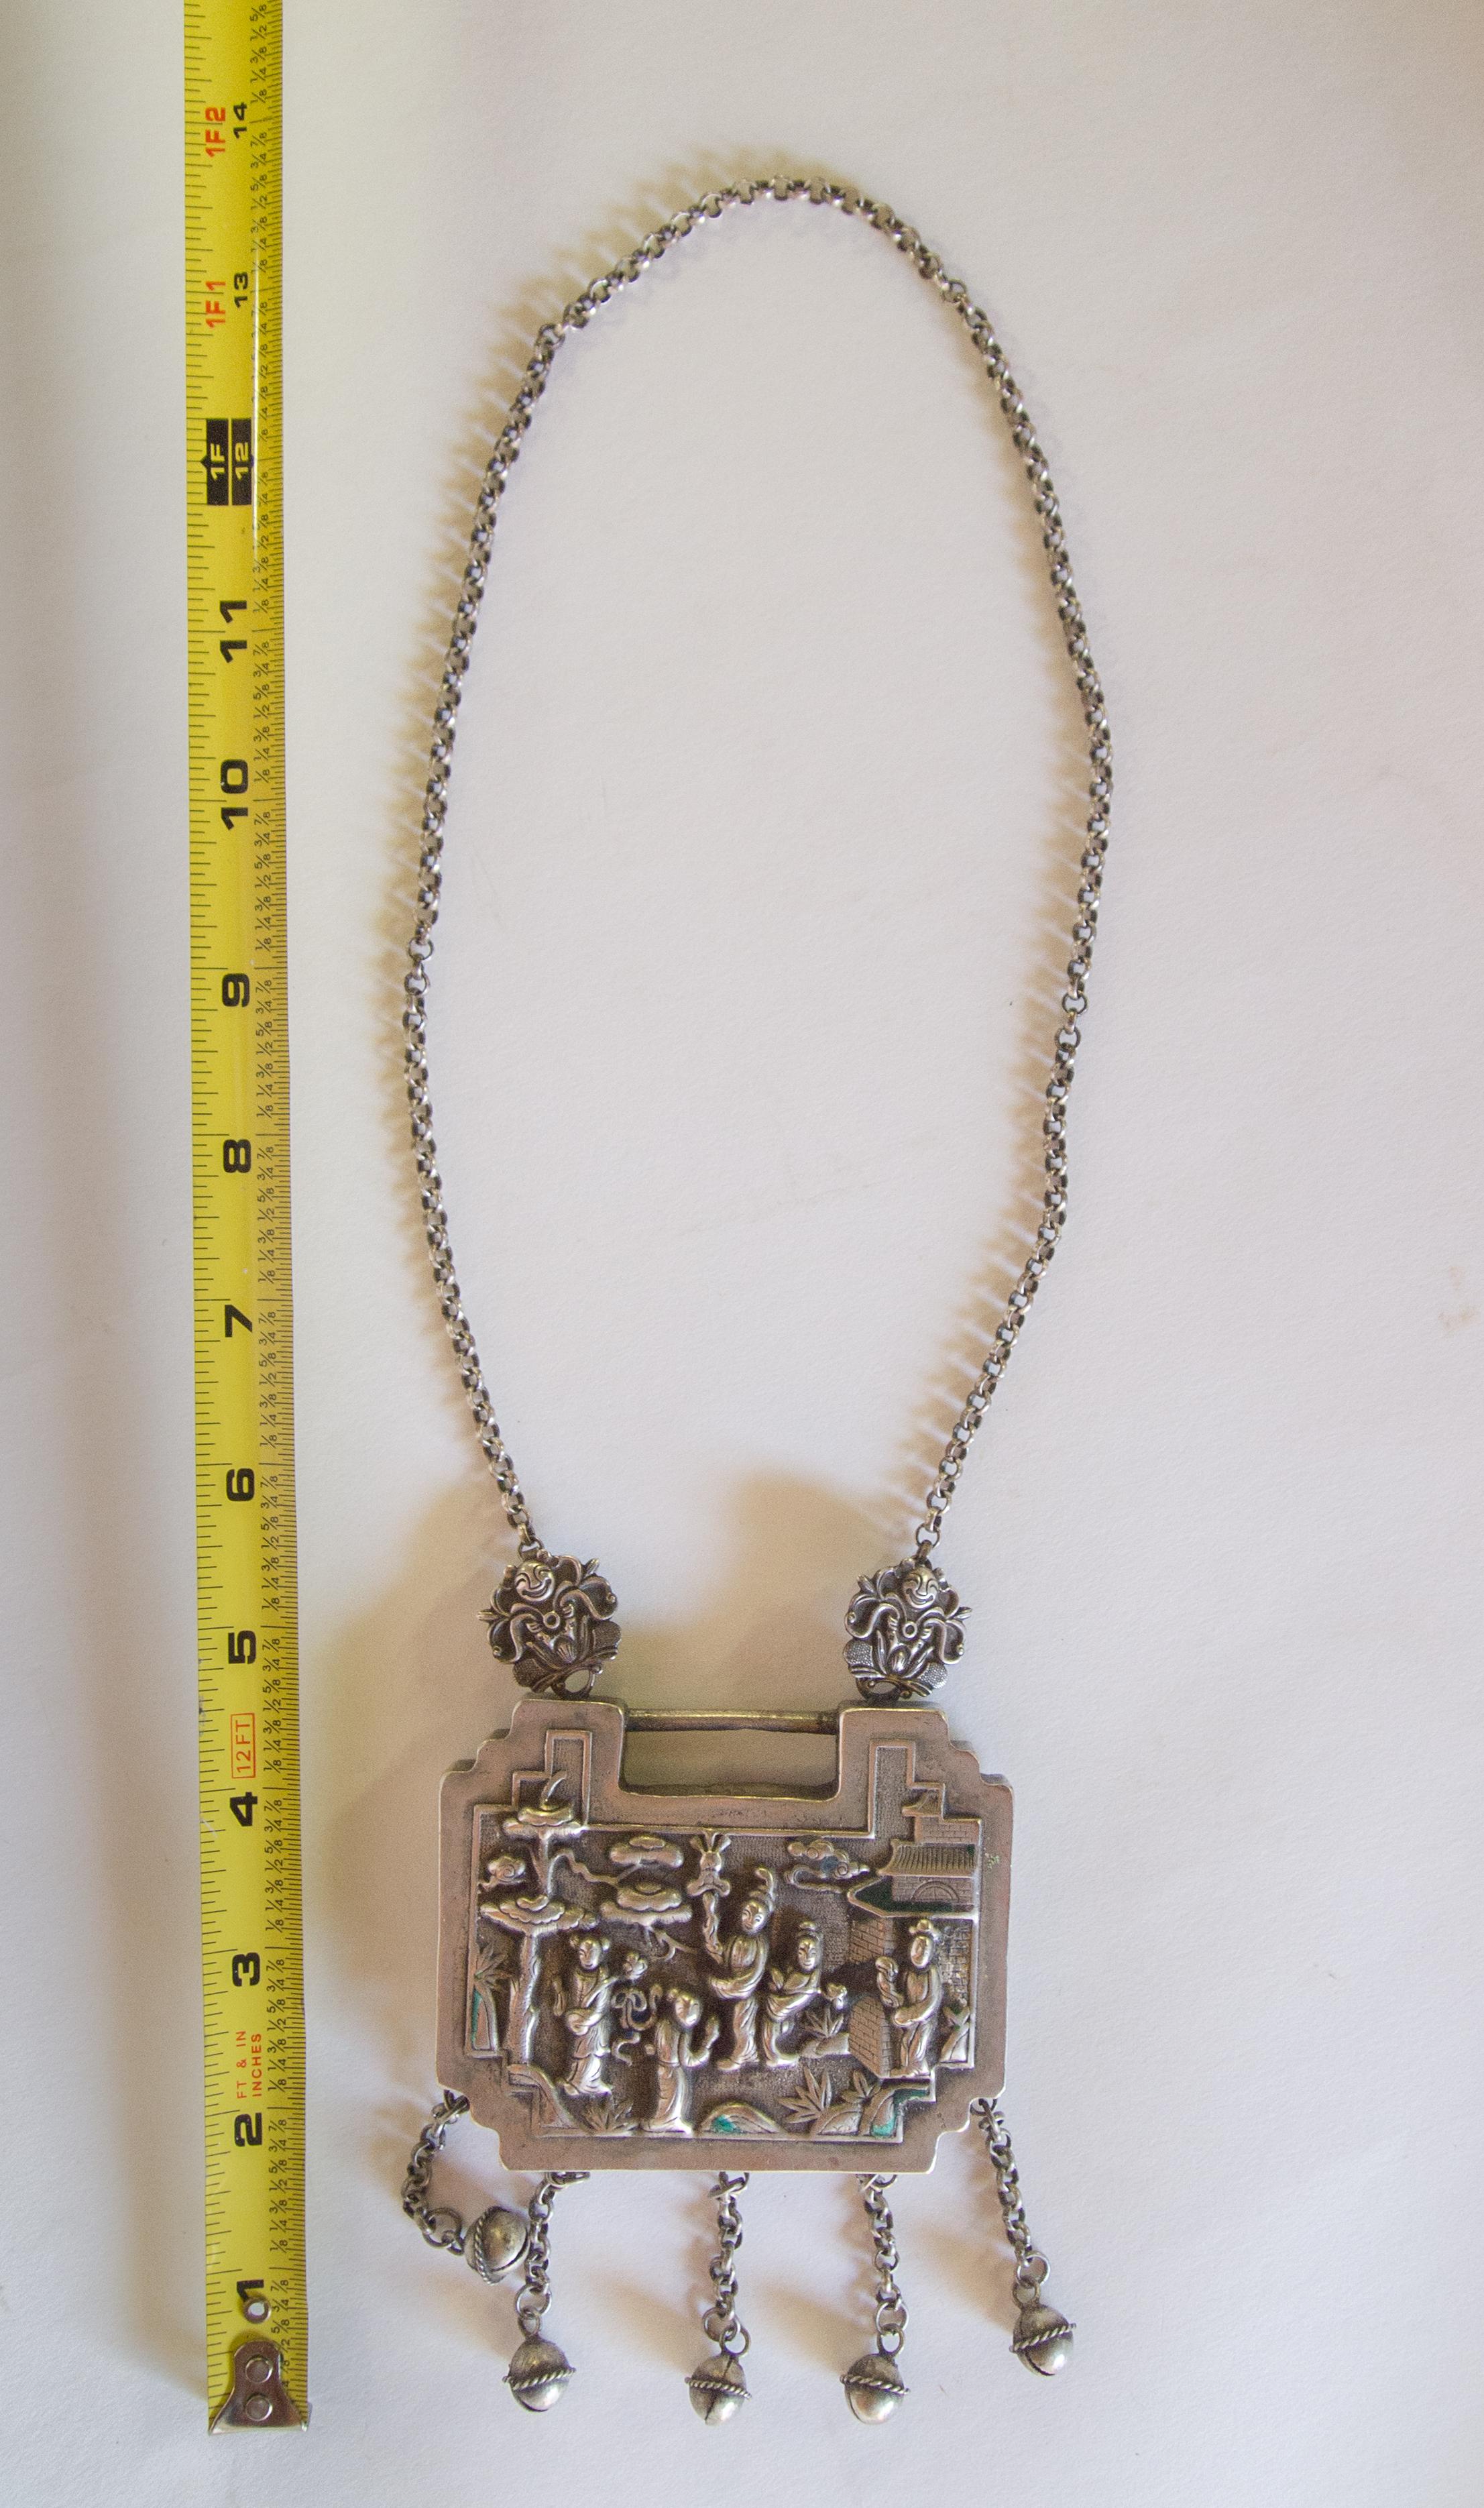 Child Amulet Lock, Silver Alloy, Yao or Hmong of SW China, Early 20th Century 8